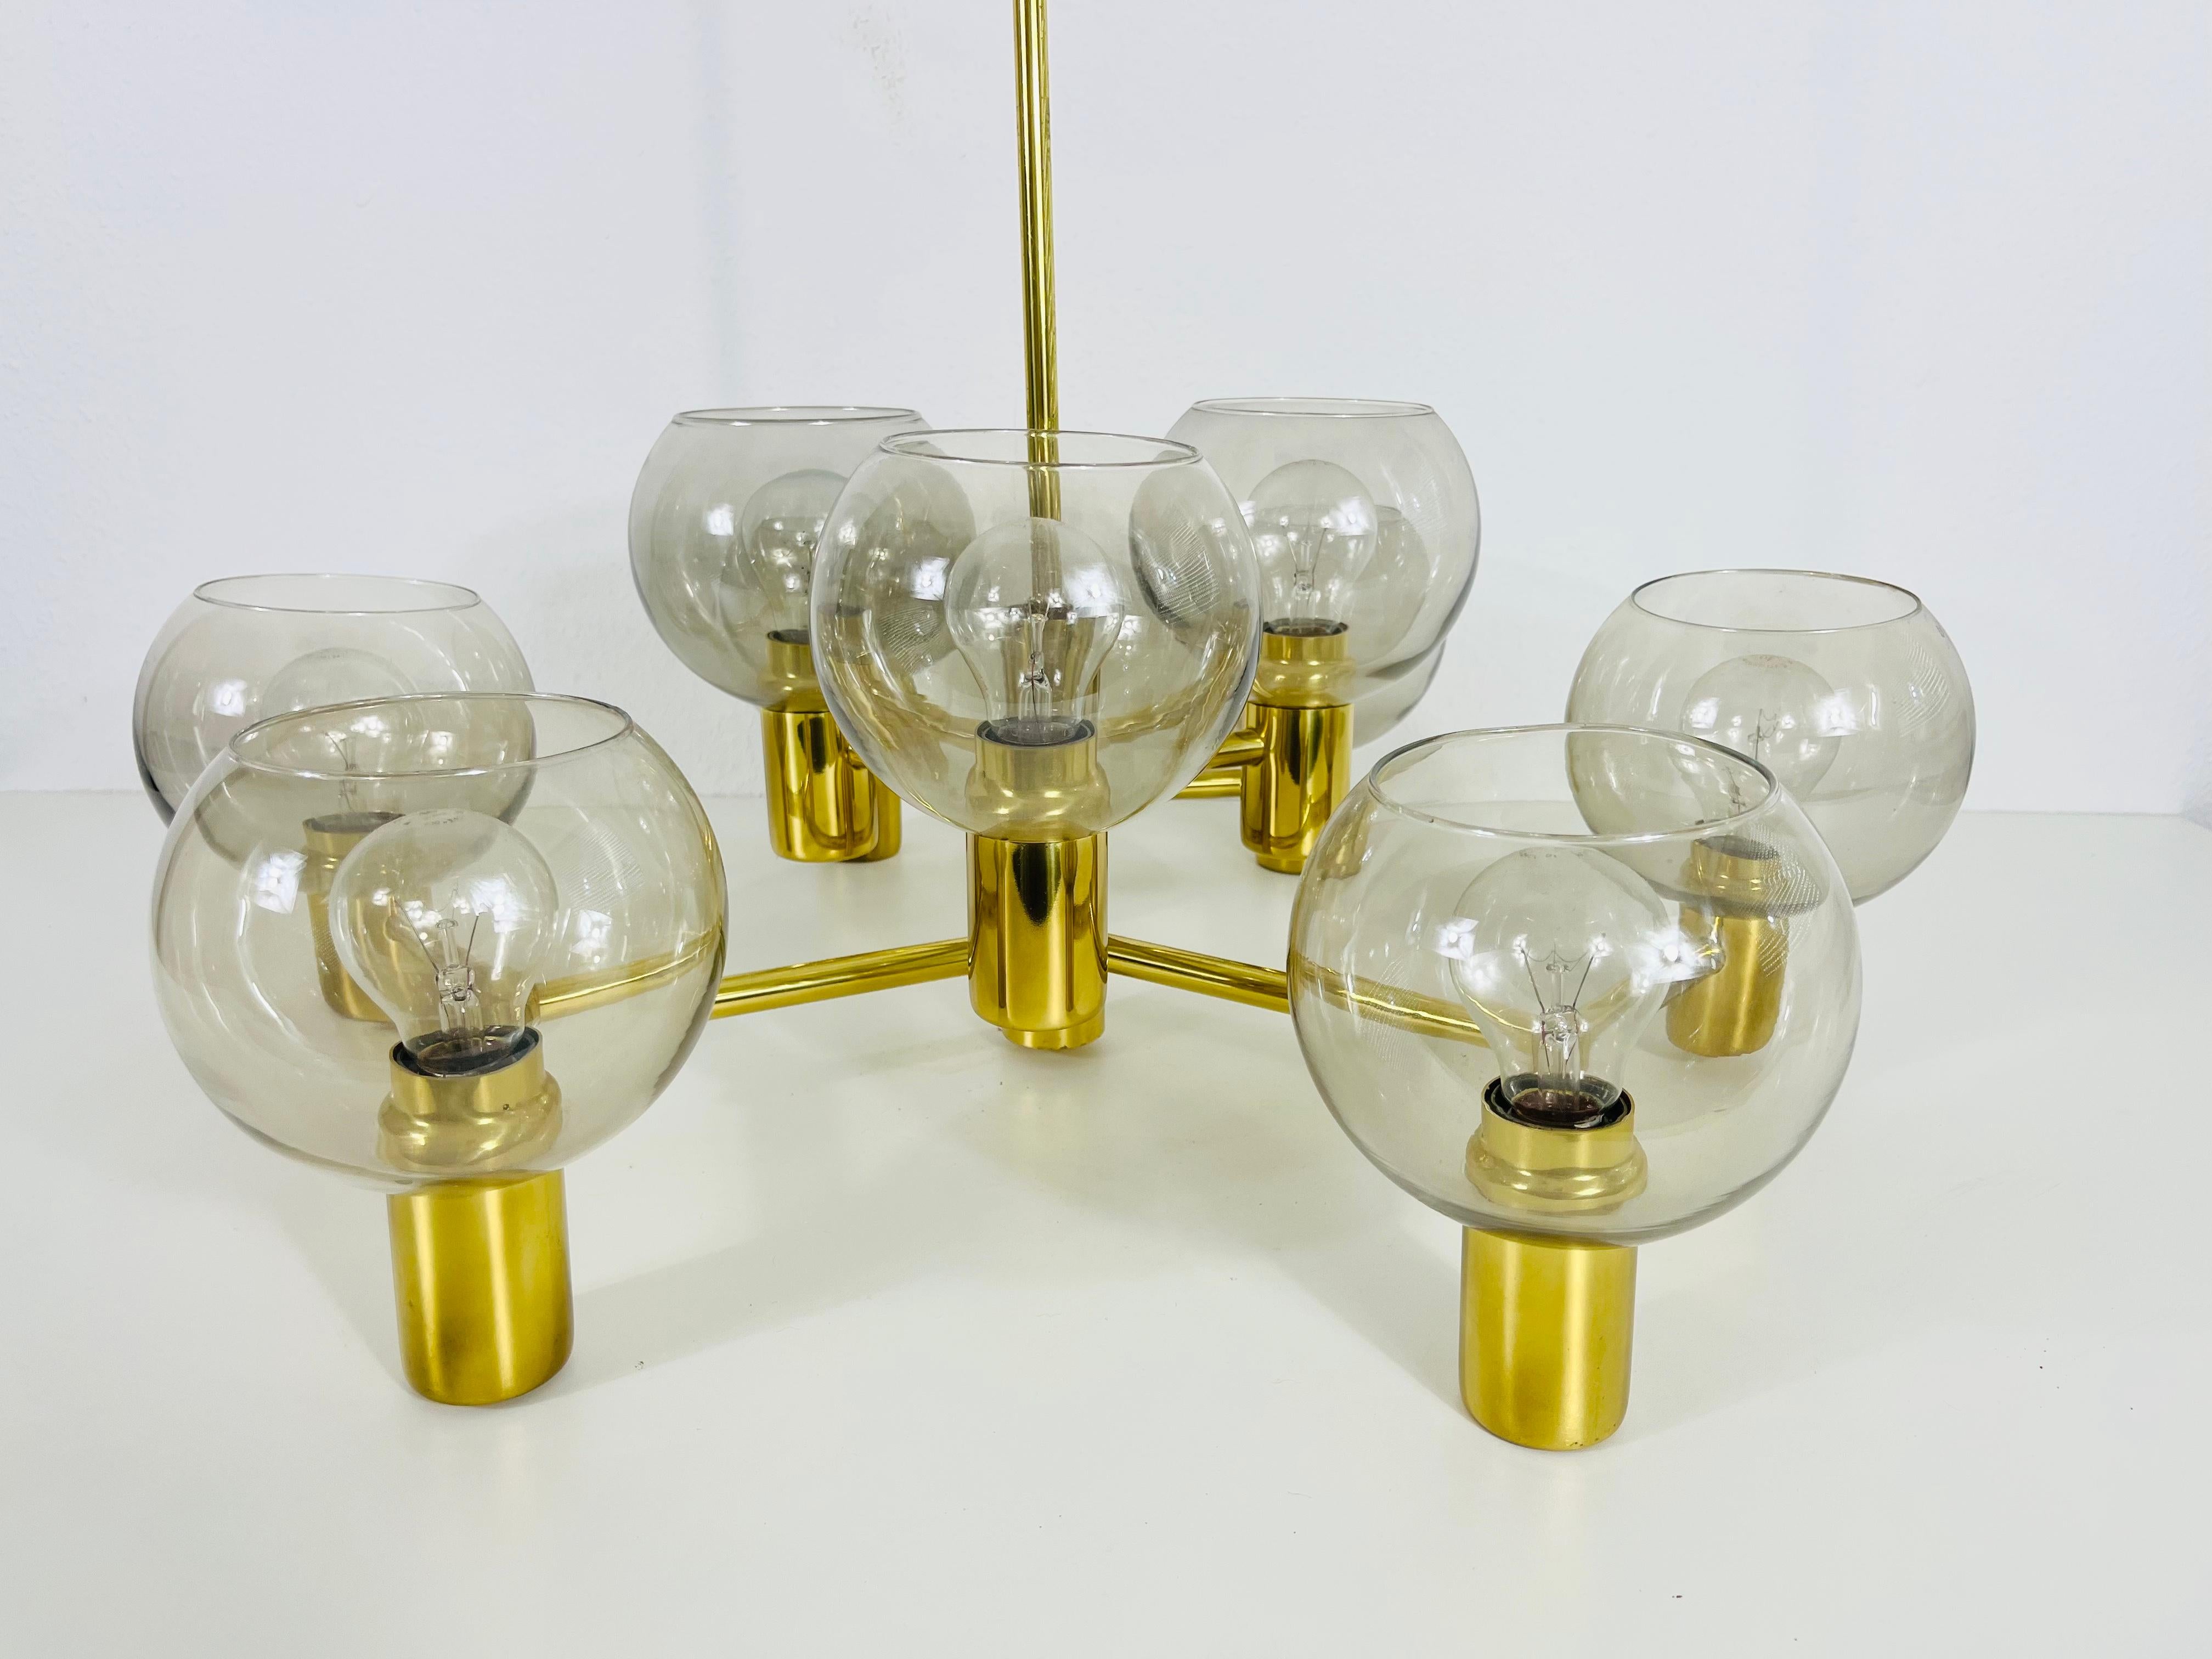 A Swedish midcentury chandelier made in the 1960s, attributed to Hans-Agne Jakobsson. It is fascinating with its monumental design and 9 glass elements. The body of the light is made of polished brass, including the arms.

Good vintage condition.